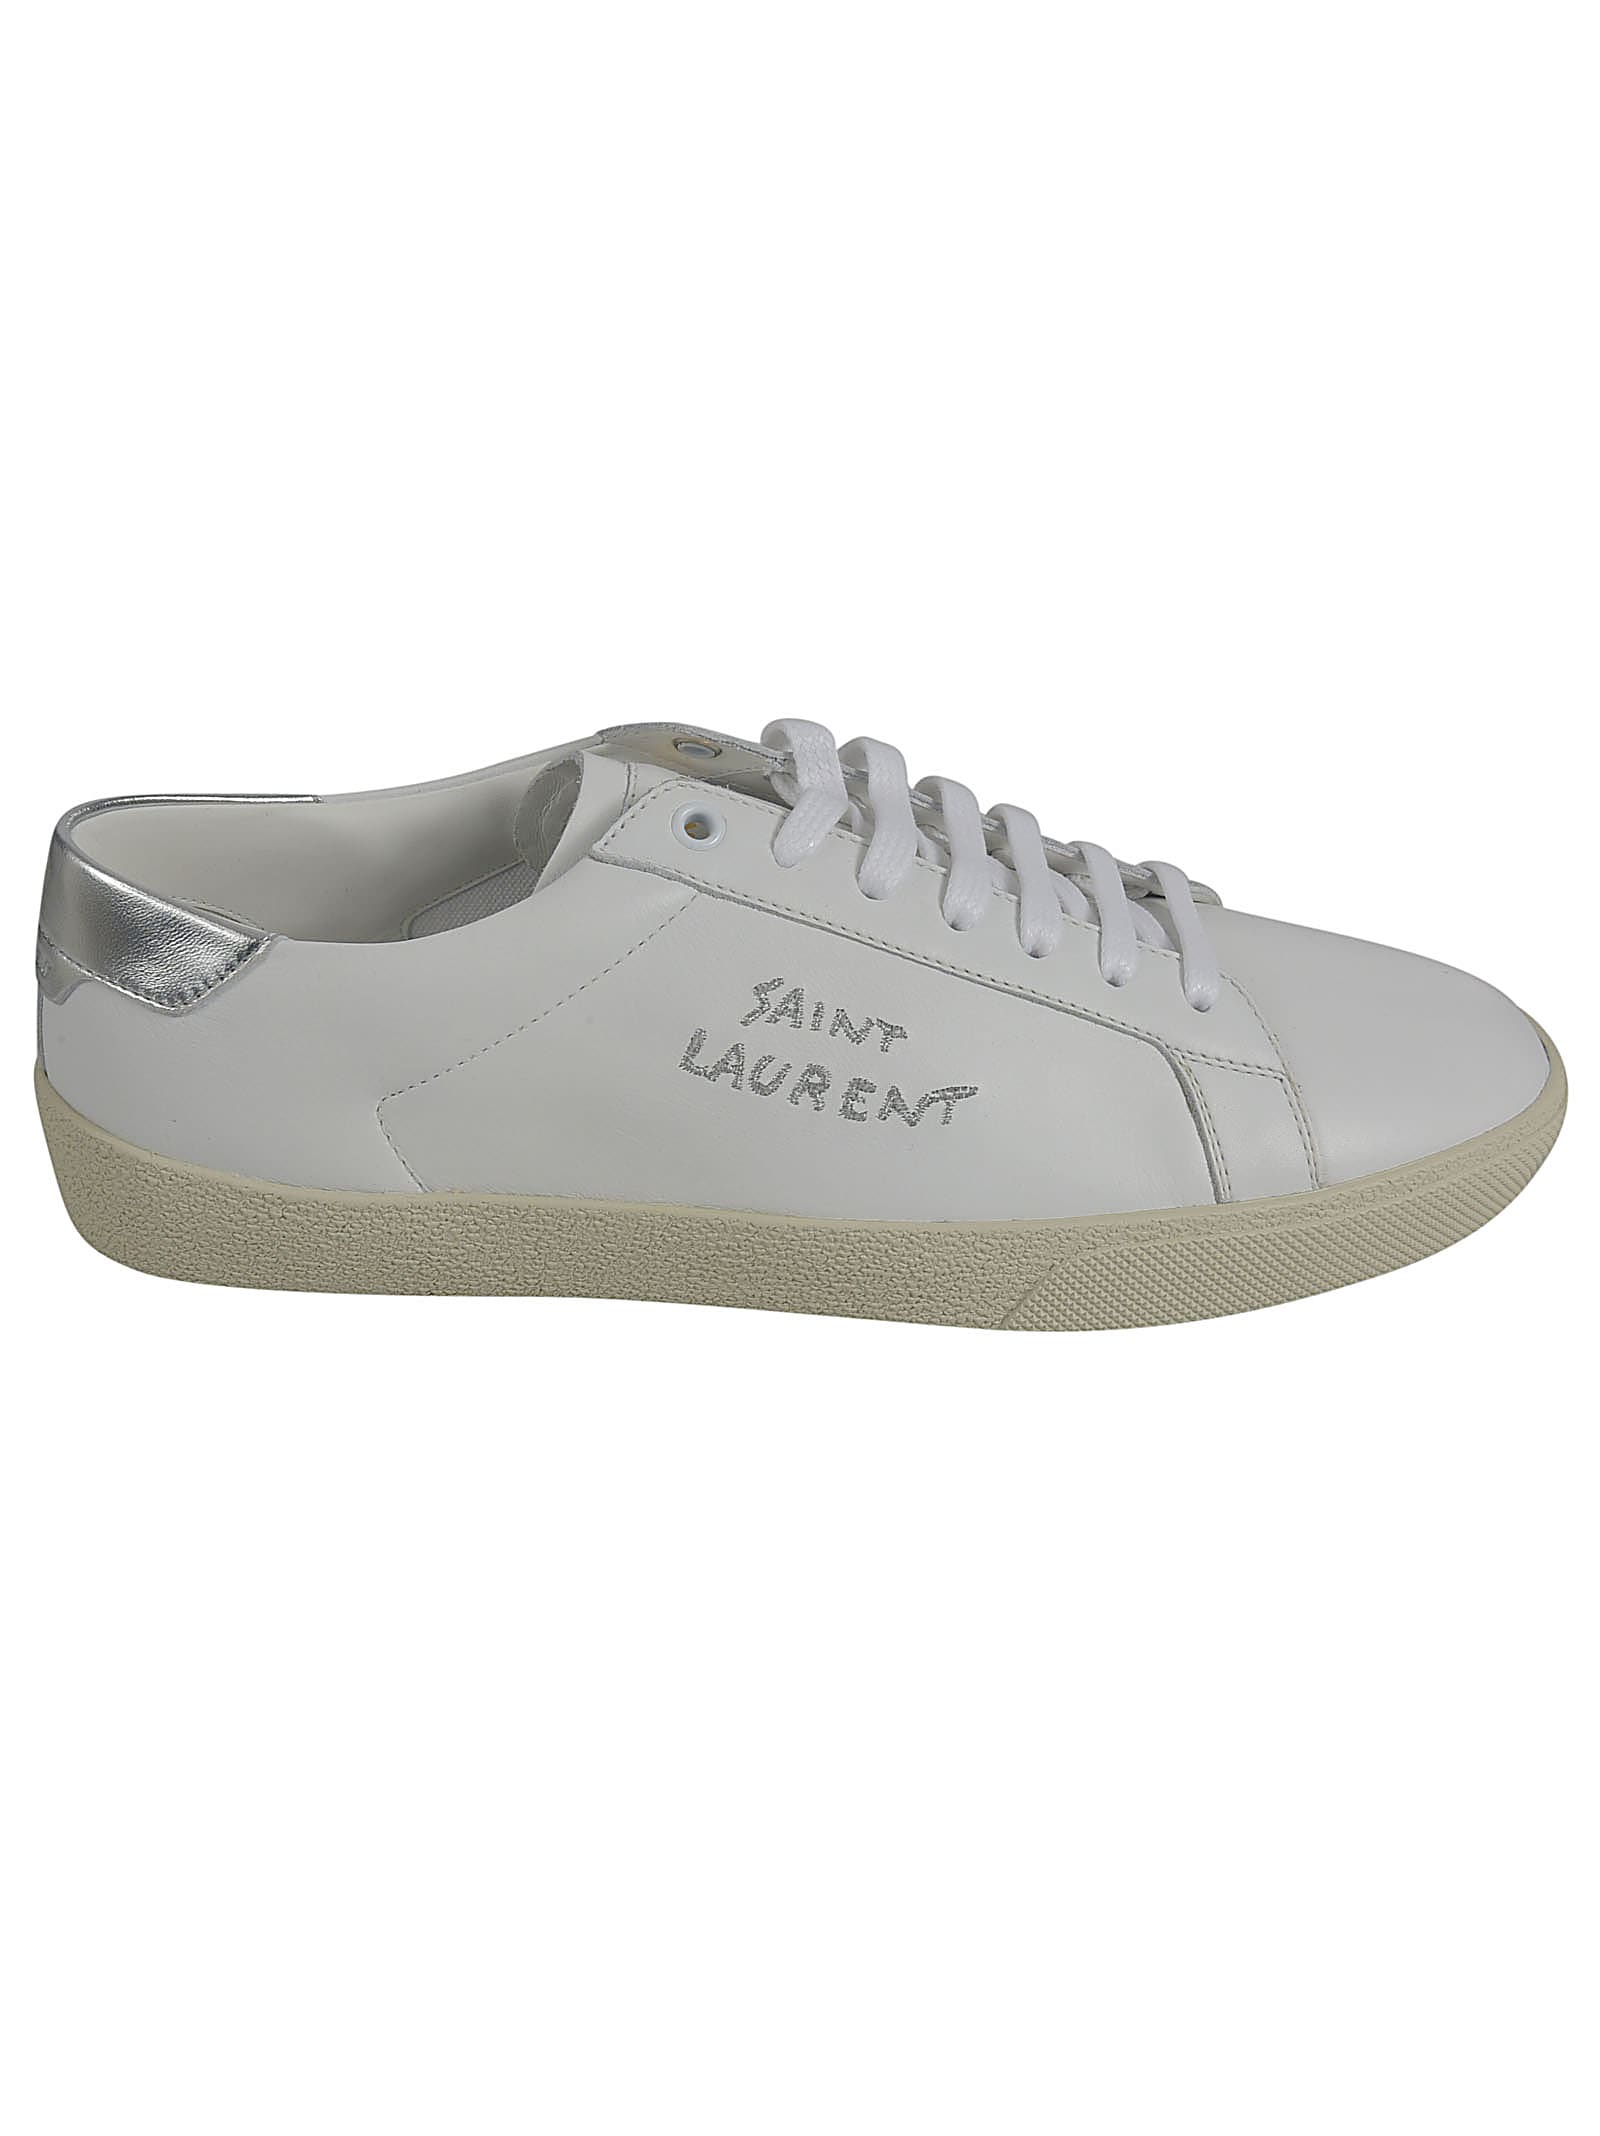 Saint Laurent Low Top Embroidered Sneakers